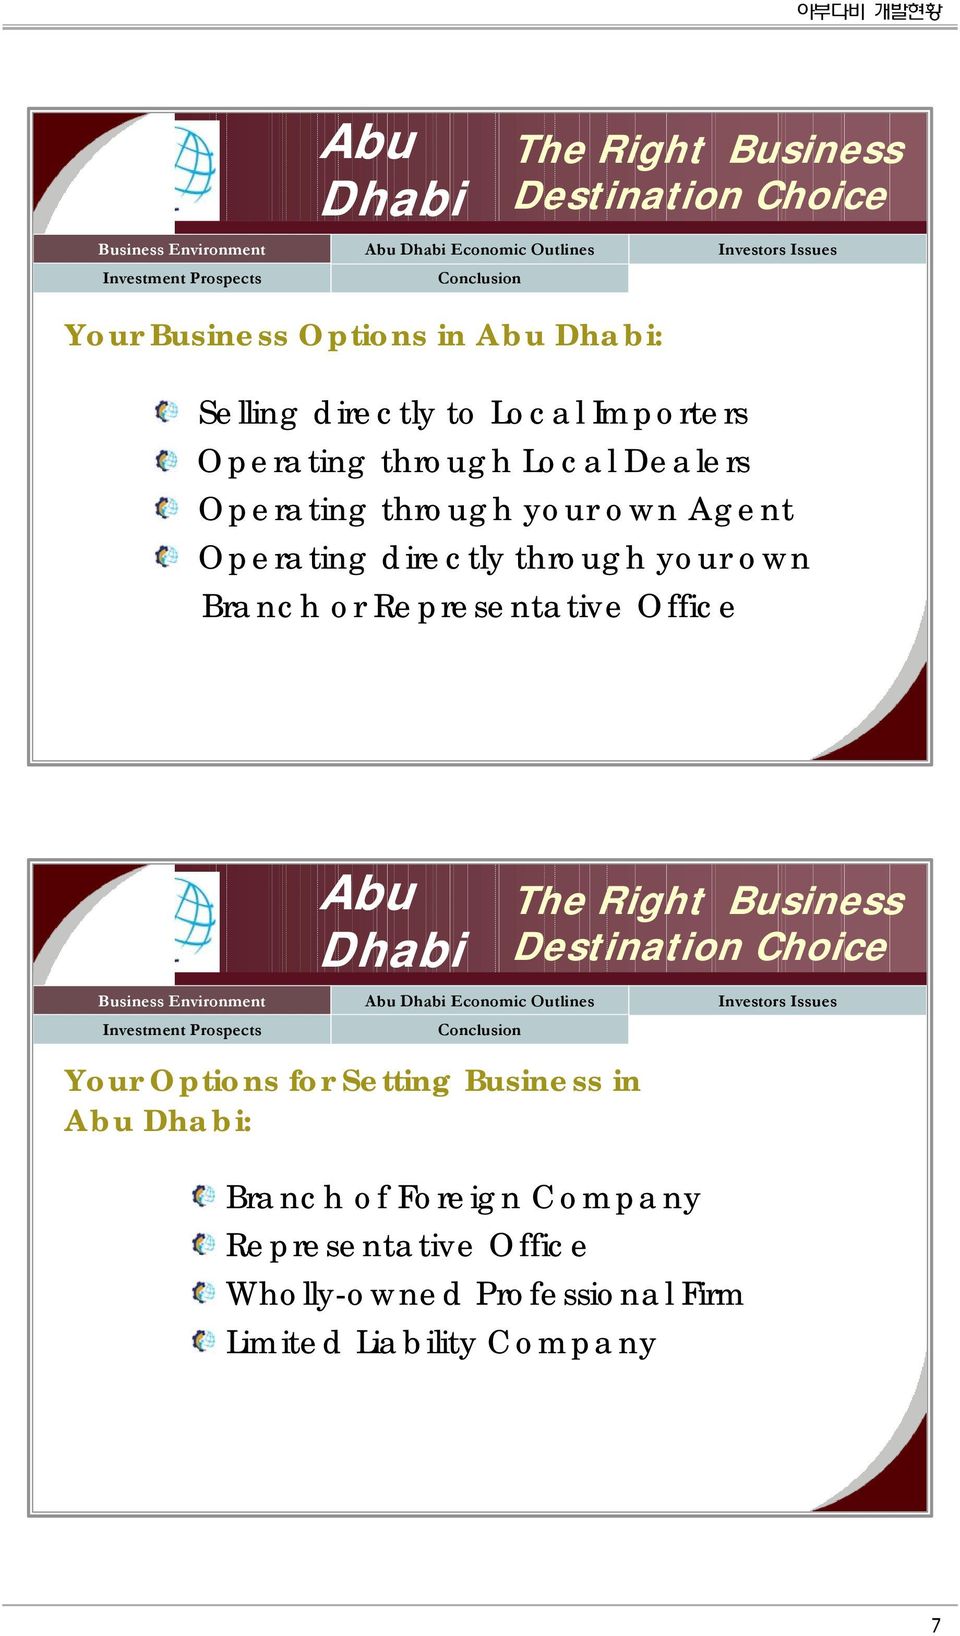 own Branch or Representative Office Abu Dhabi The Right Business Destination Choice Business Environment Abu Dhabi Economic Outlines Investors Issues Investment